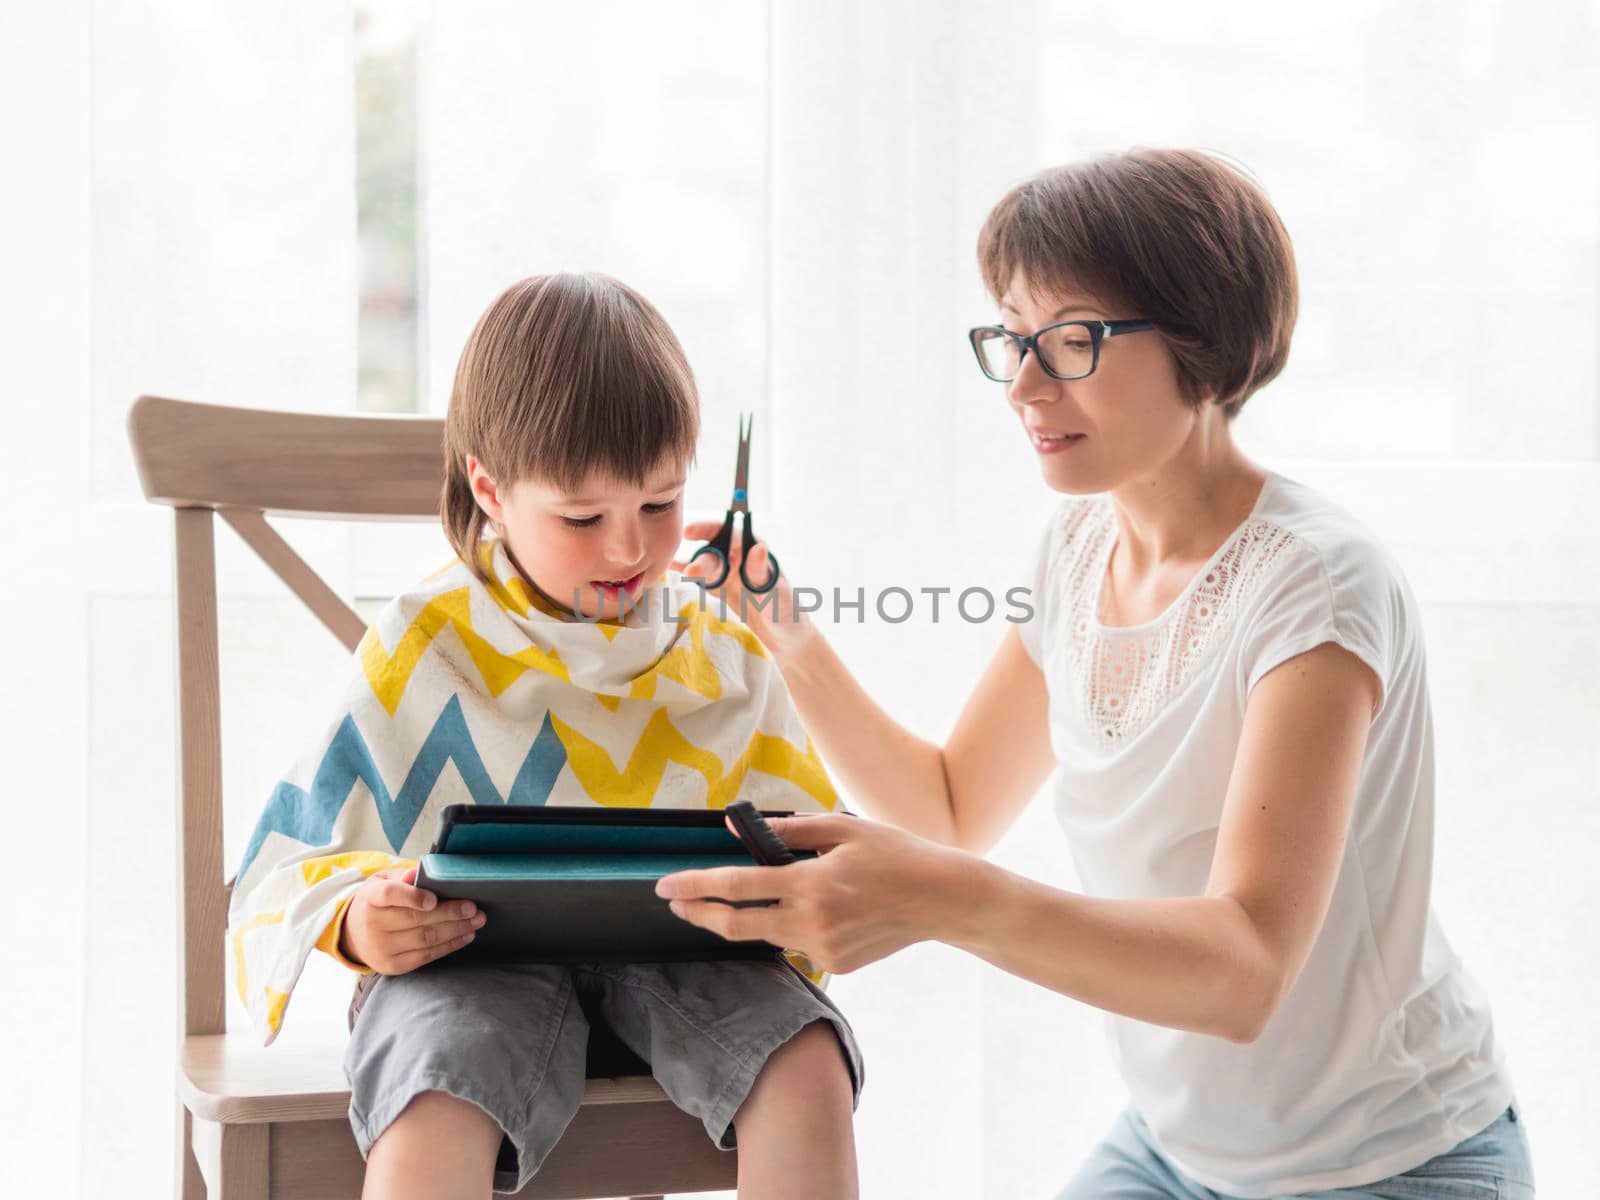 Mother cuts her son's hair by herself. Little boy sits with digital tablet. New normal in case of coronavirus COVID-19 quarantine and lockdown.